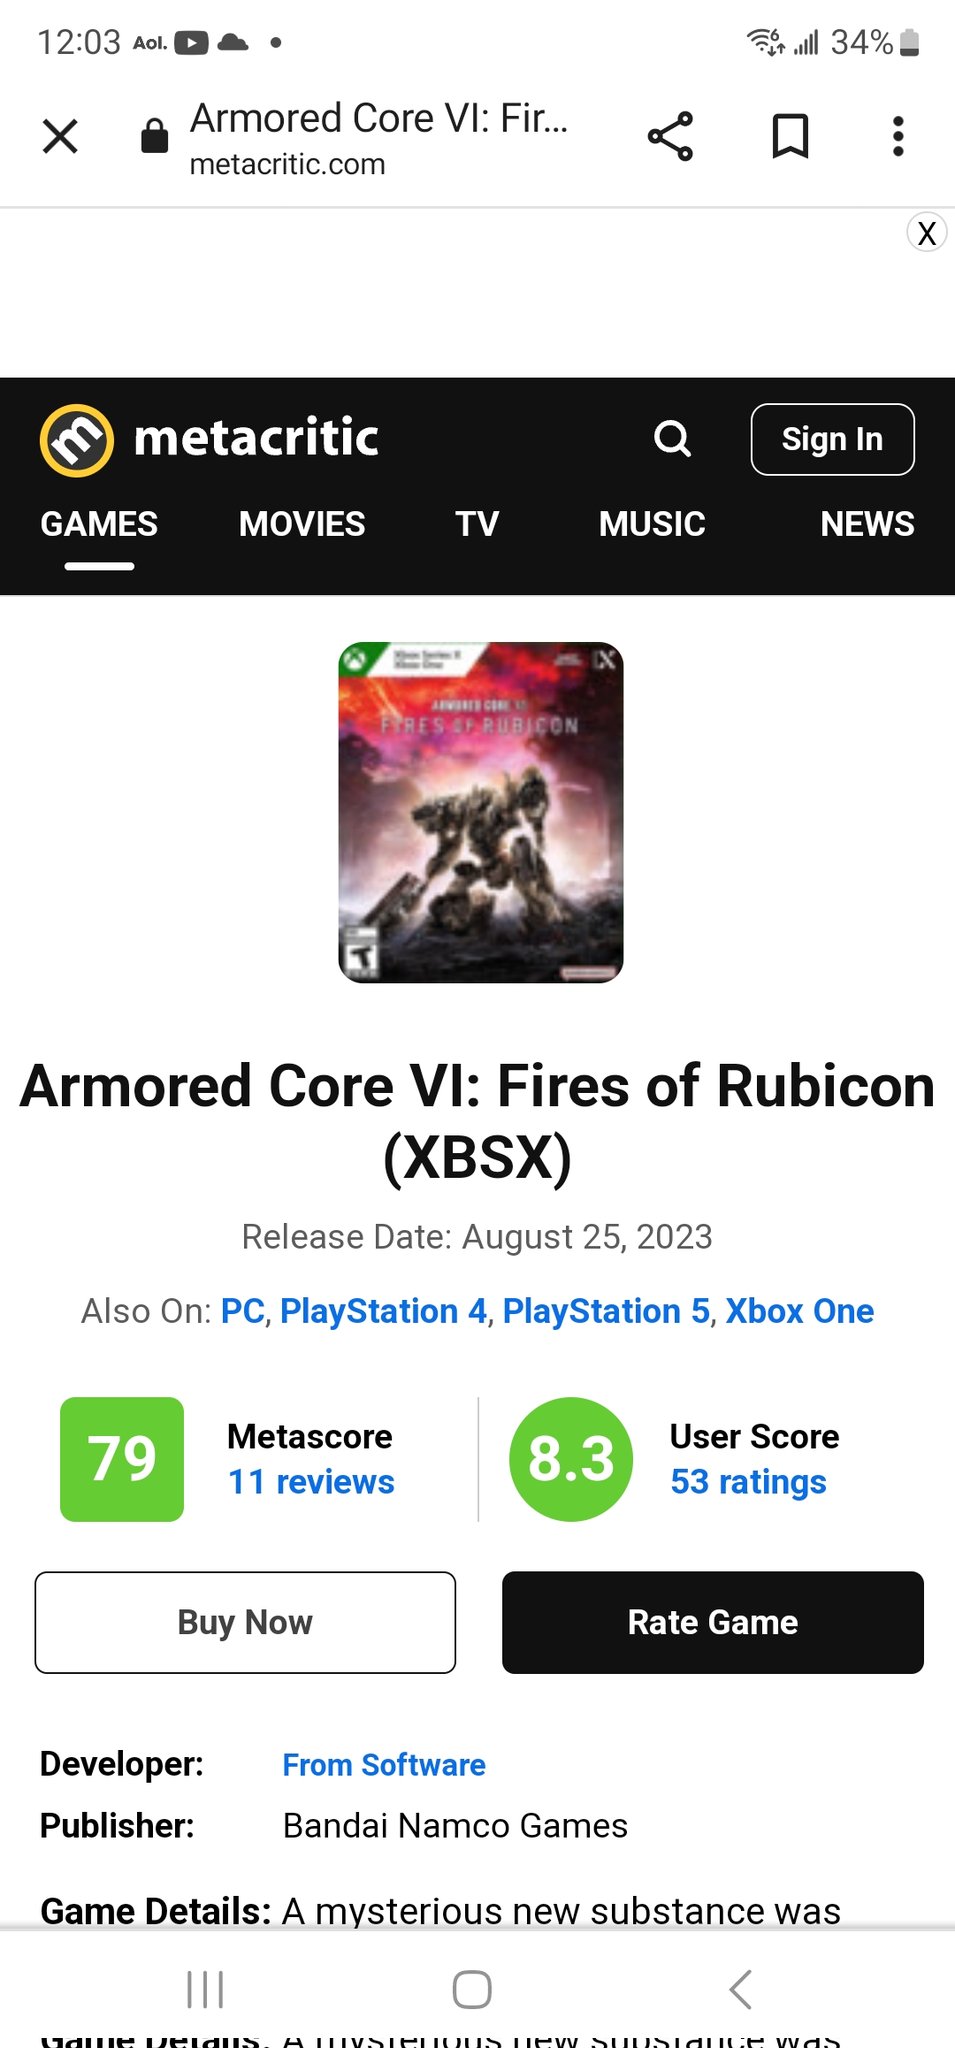 Will Starfield (PC) have a higher Metacritic score than Armored Core VI:  Fires of Rubicon (PC) on Sep 13th?